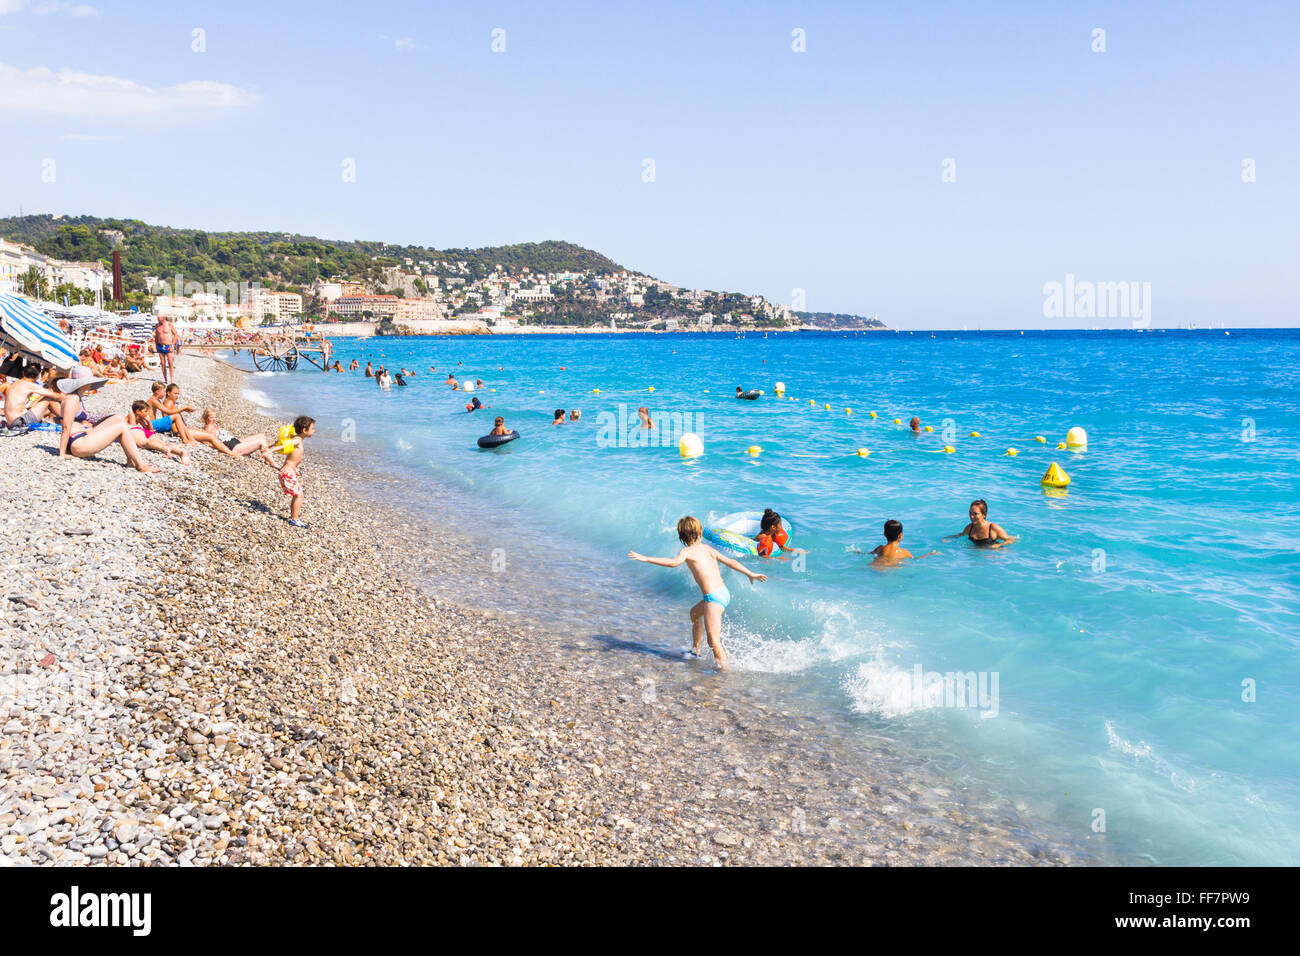 NICE, FRANCE - AUGUST 23: Tourists enjoy the good weather at the beach